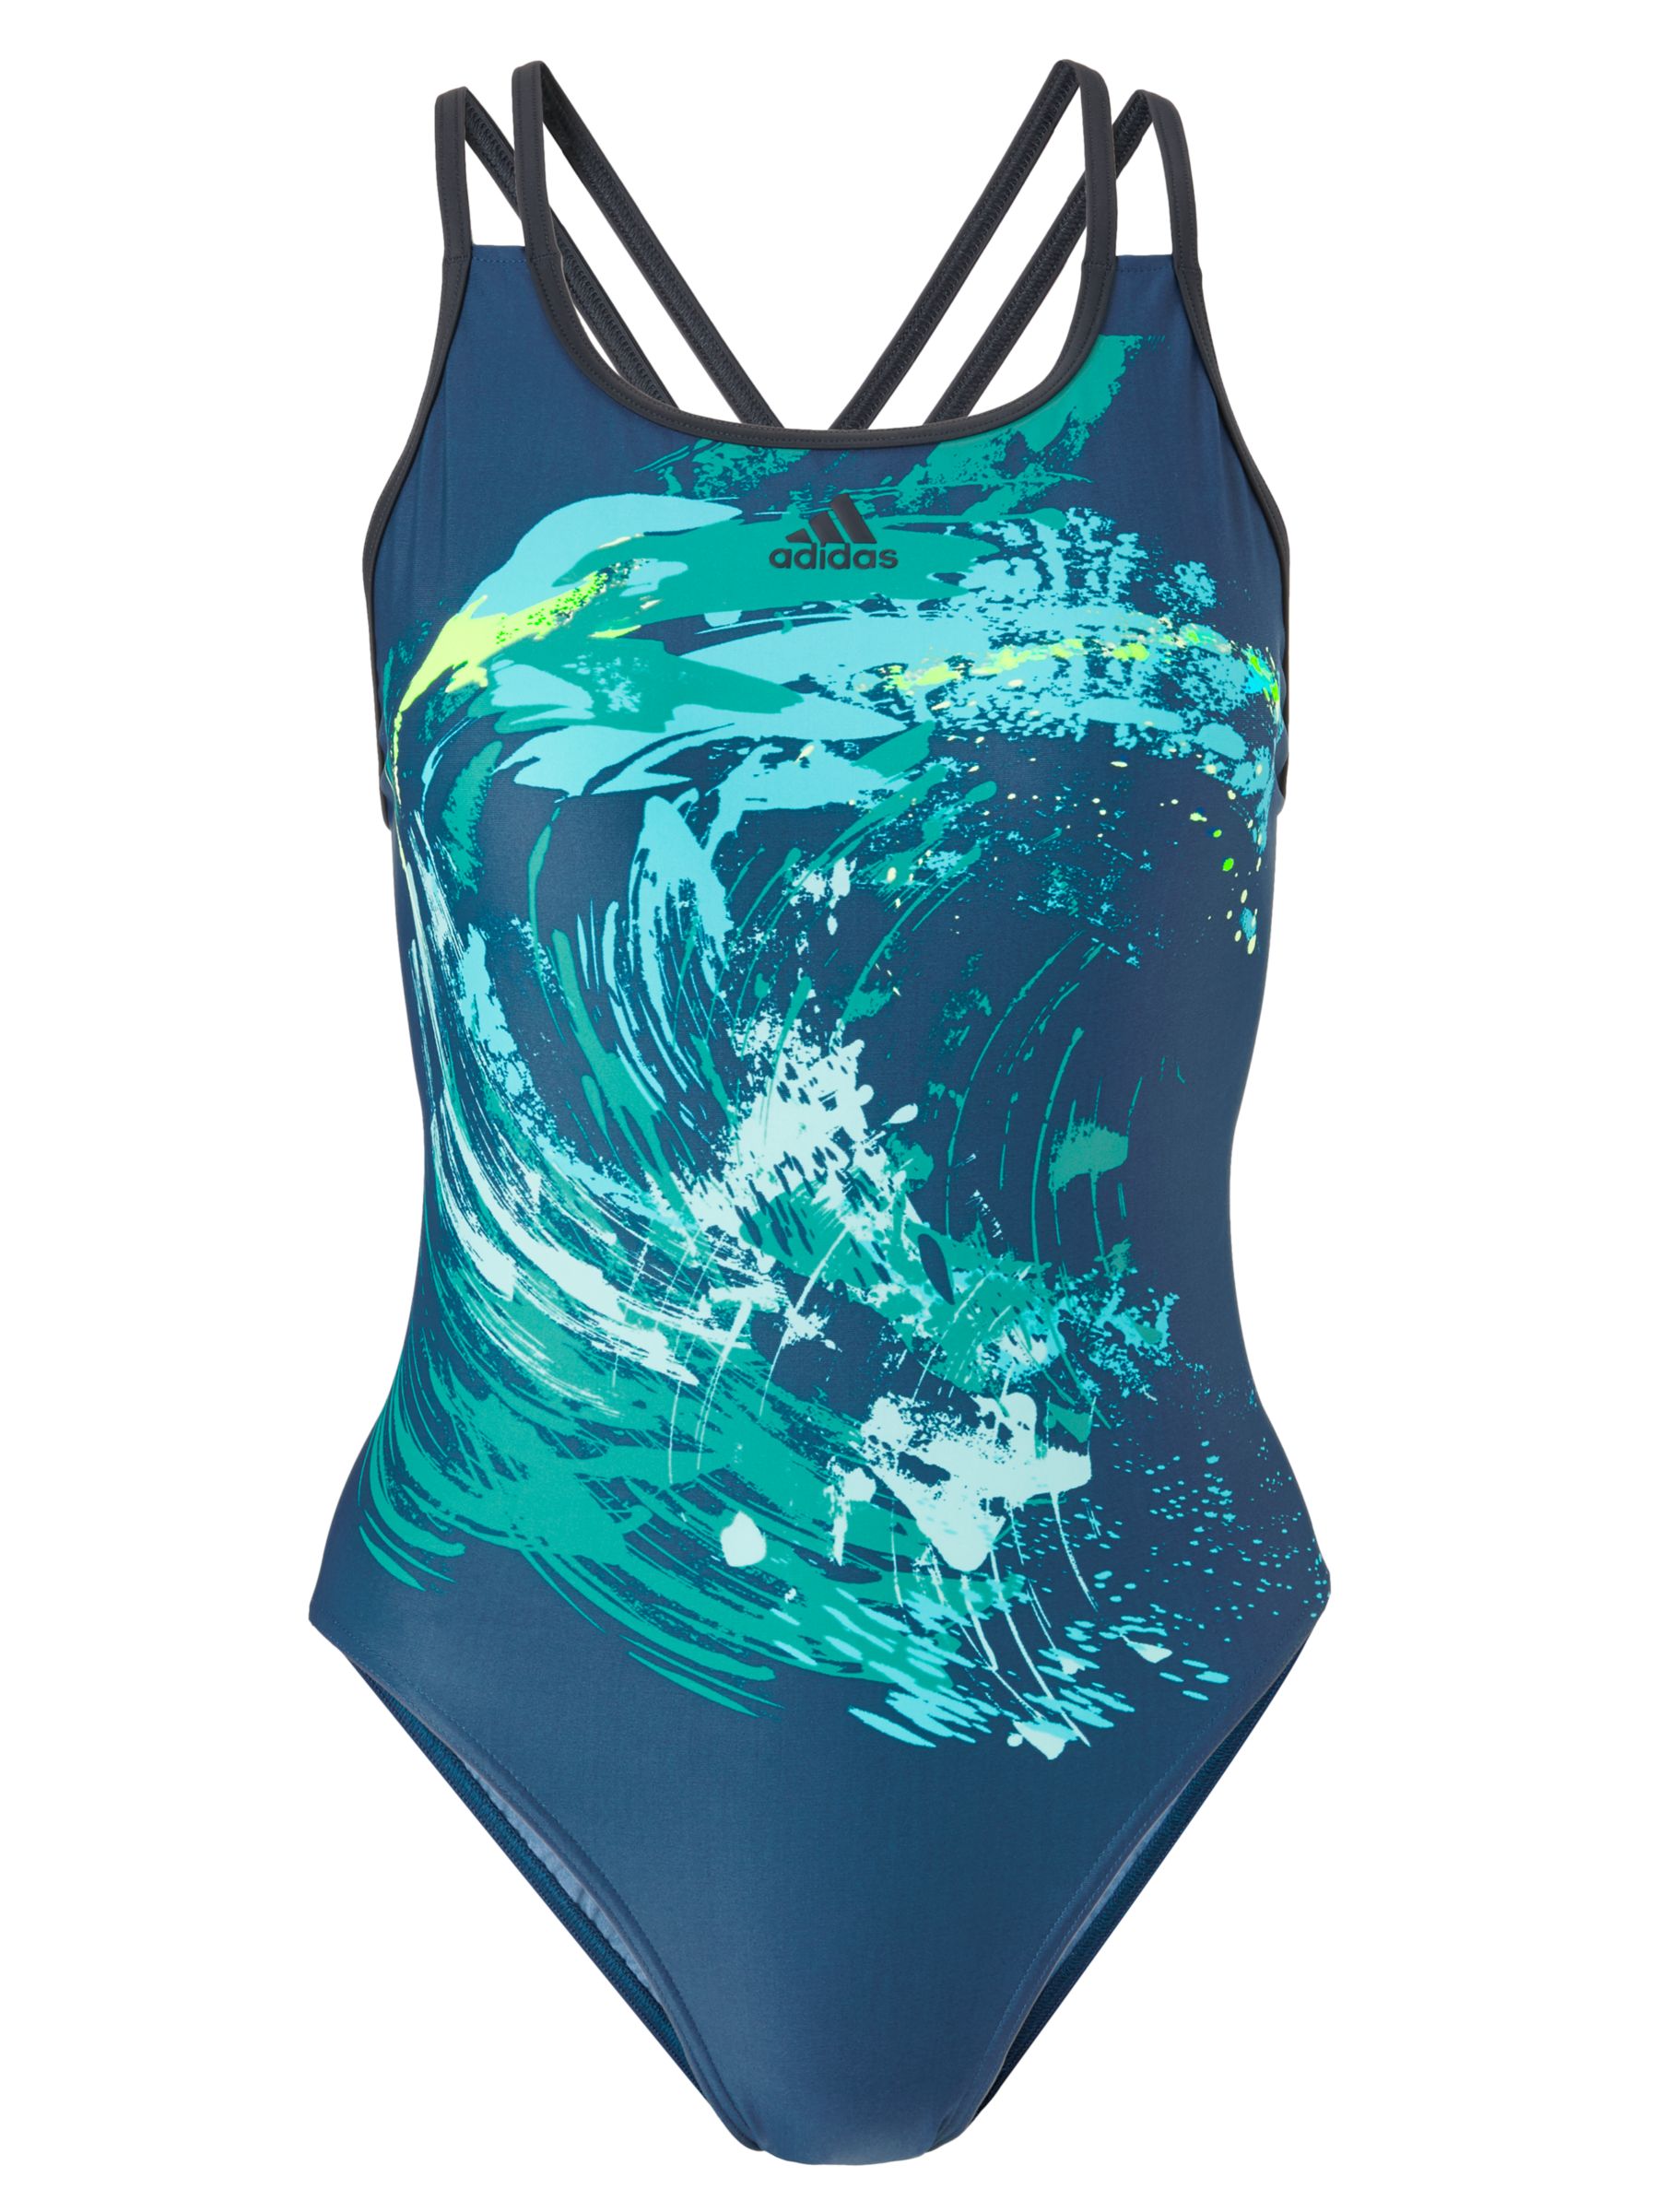 adidas parley commit swimsuit